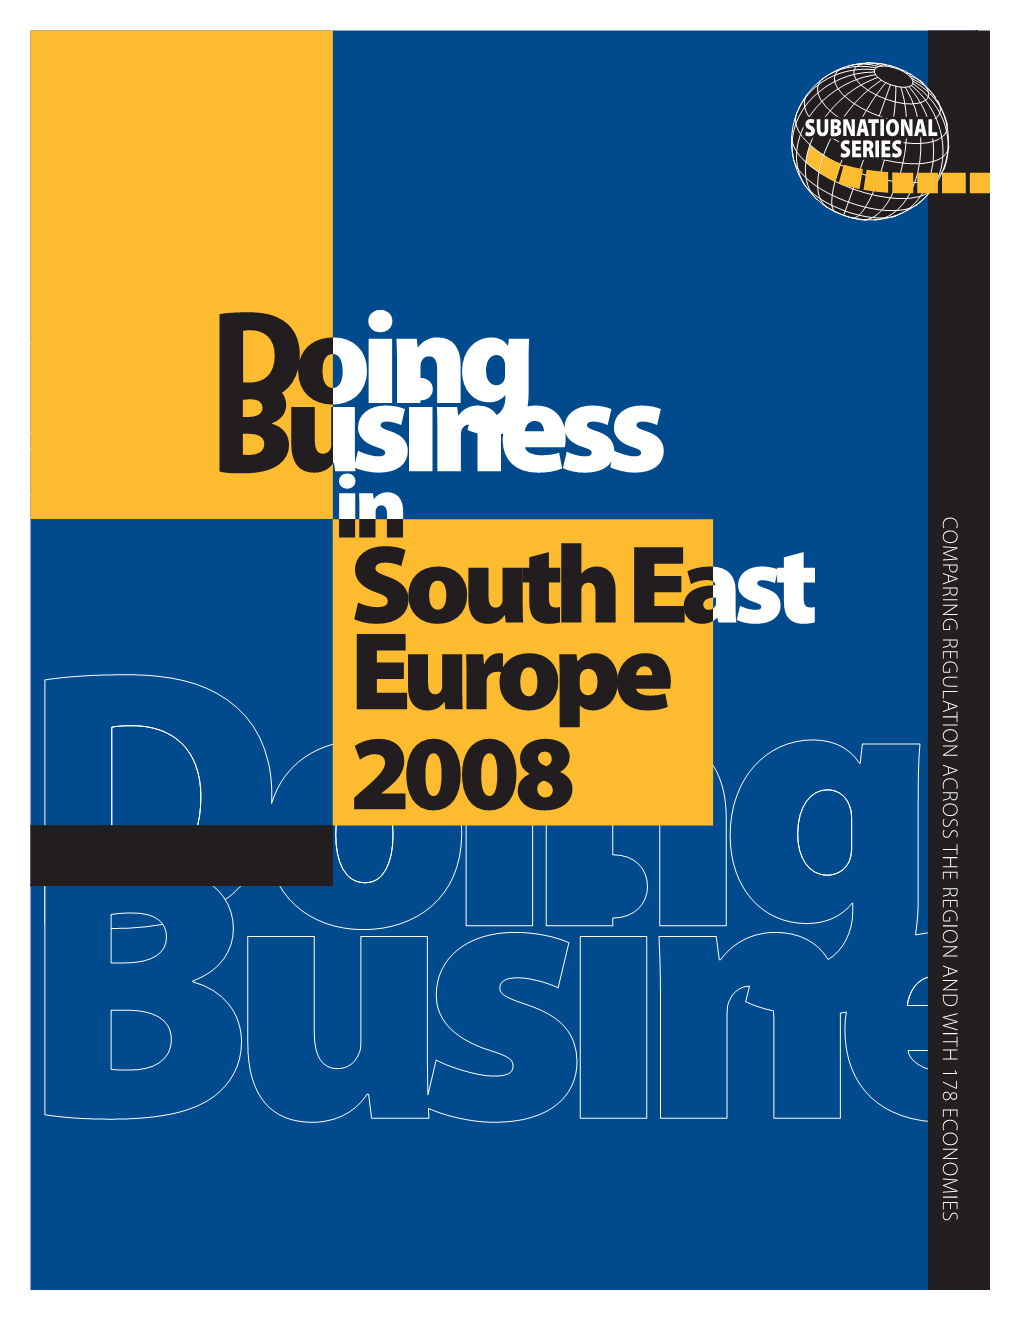 Doing Business in South East Europe 2008 and Other Subnational and Regional Studies Can Be Downloaded At